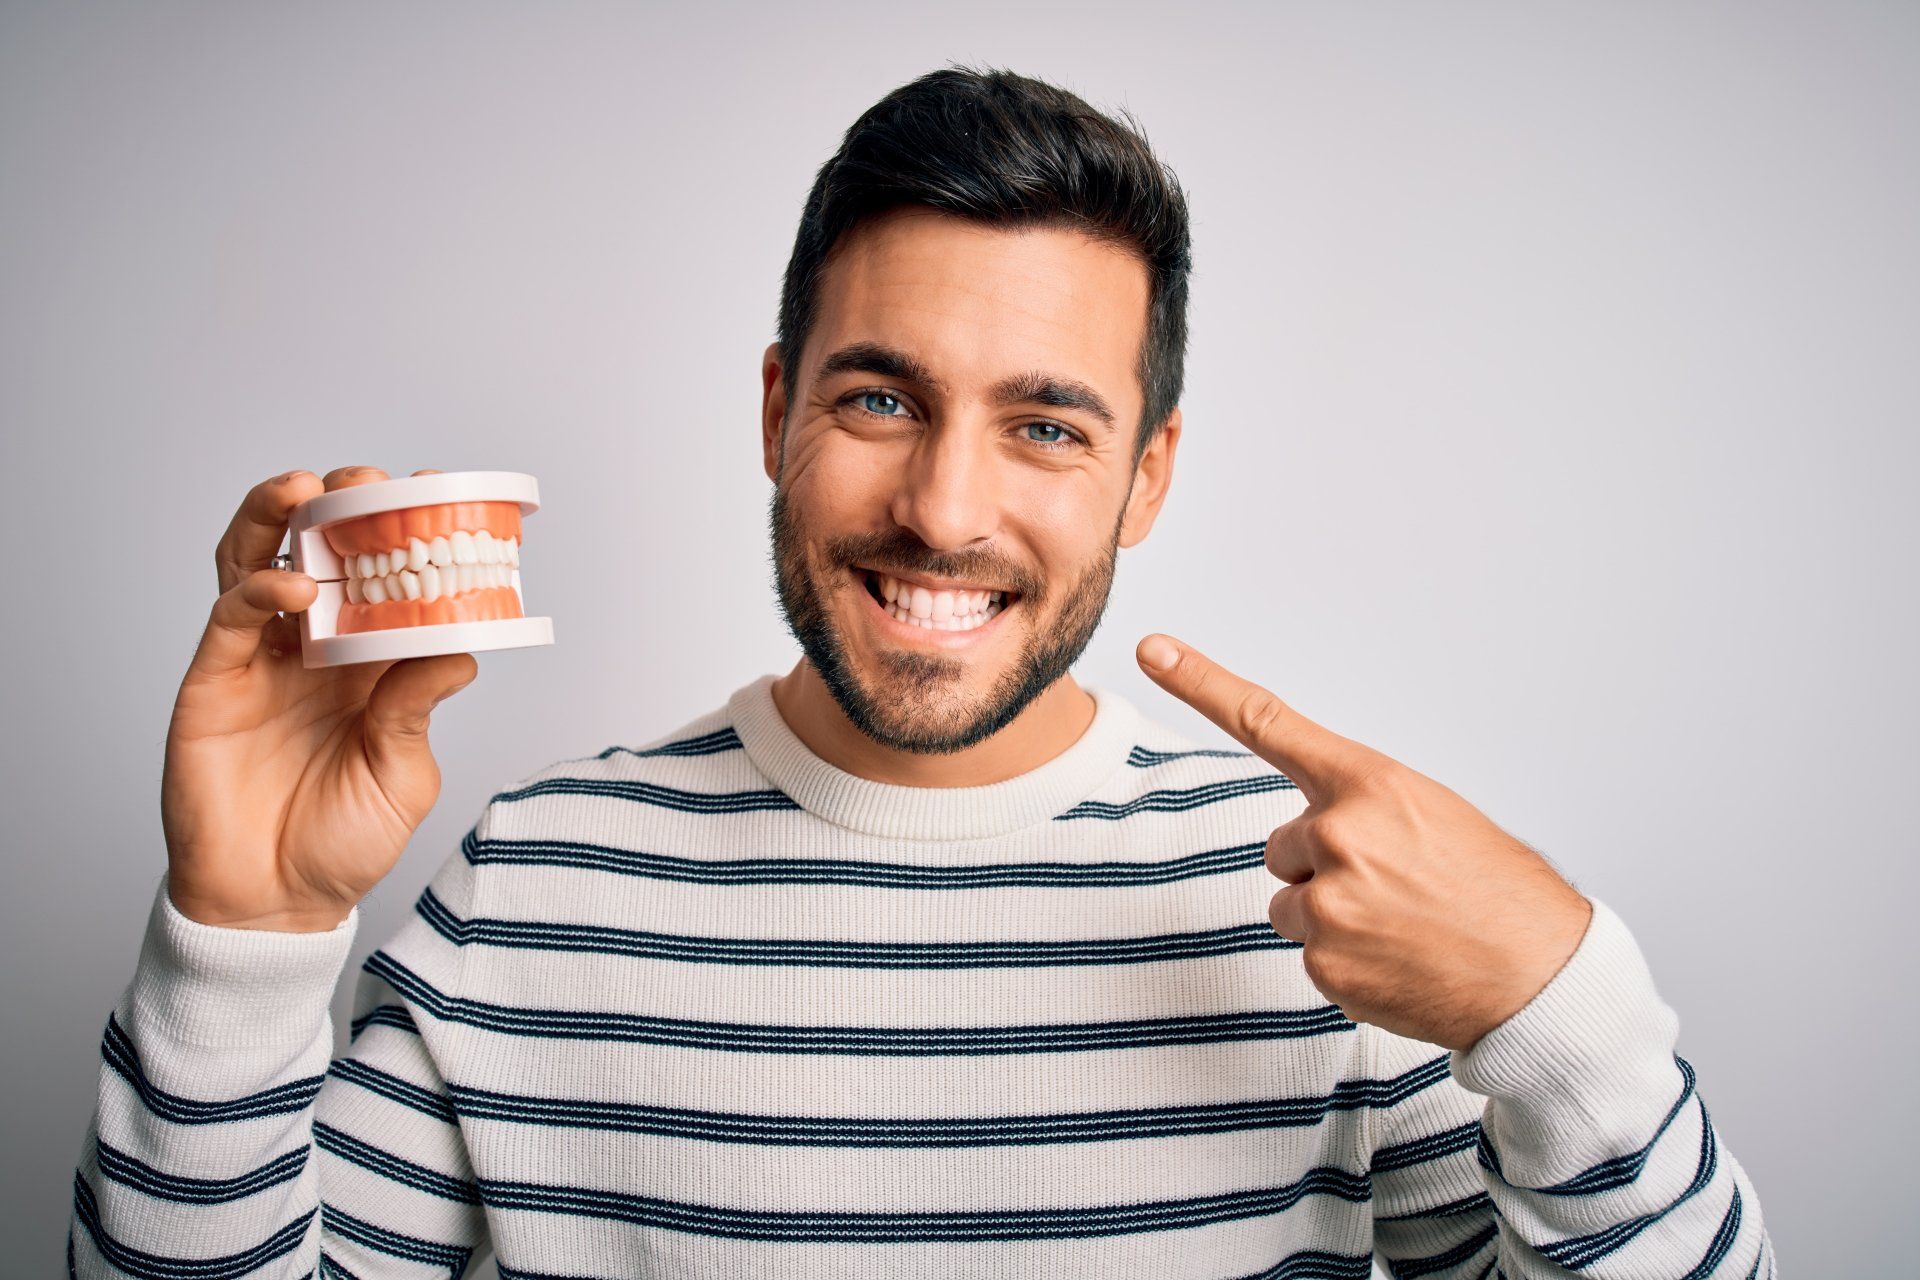 guy smiling while holding a pair of duplicate dentures in his hands that match the dentures in his mouth